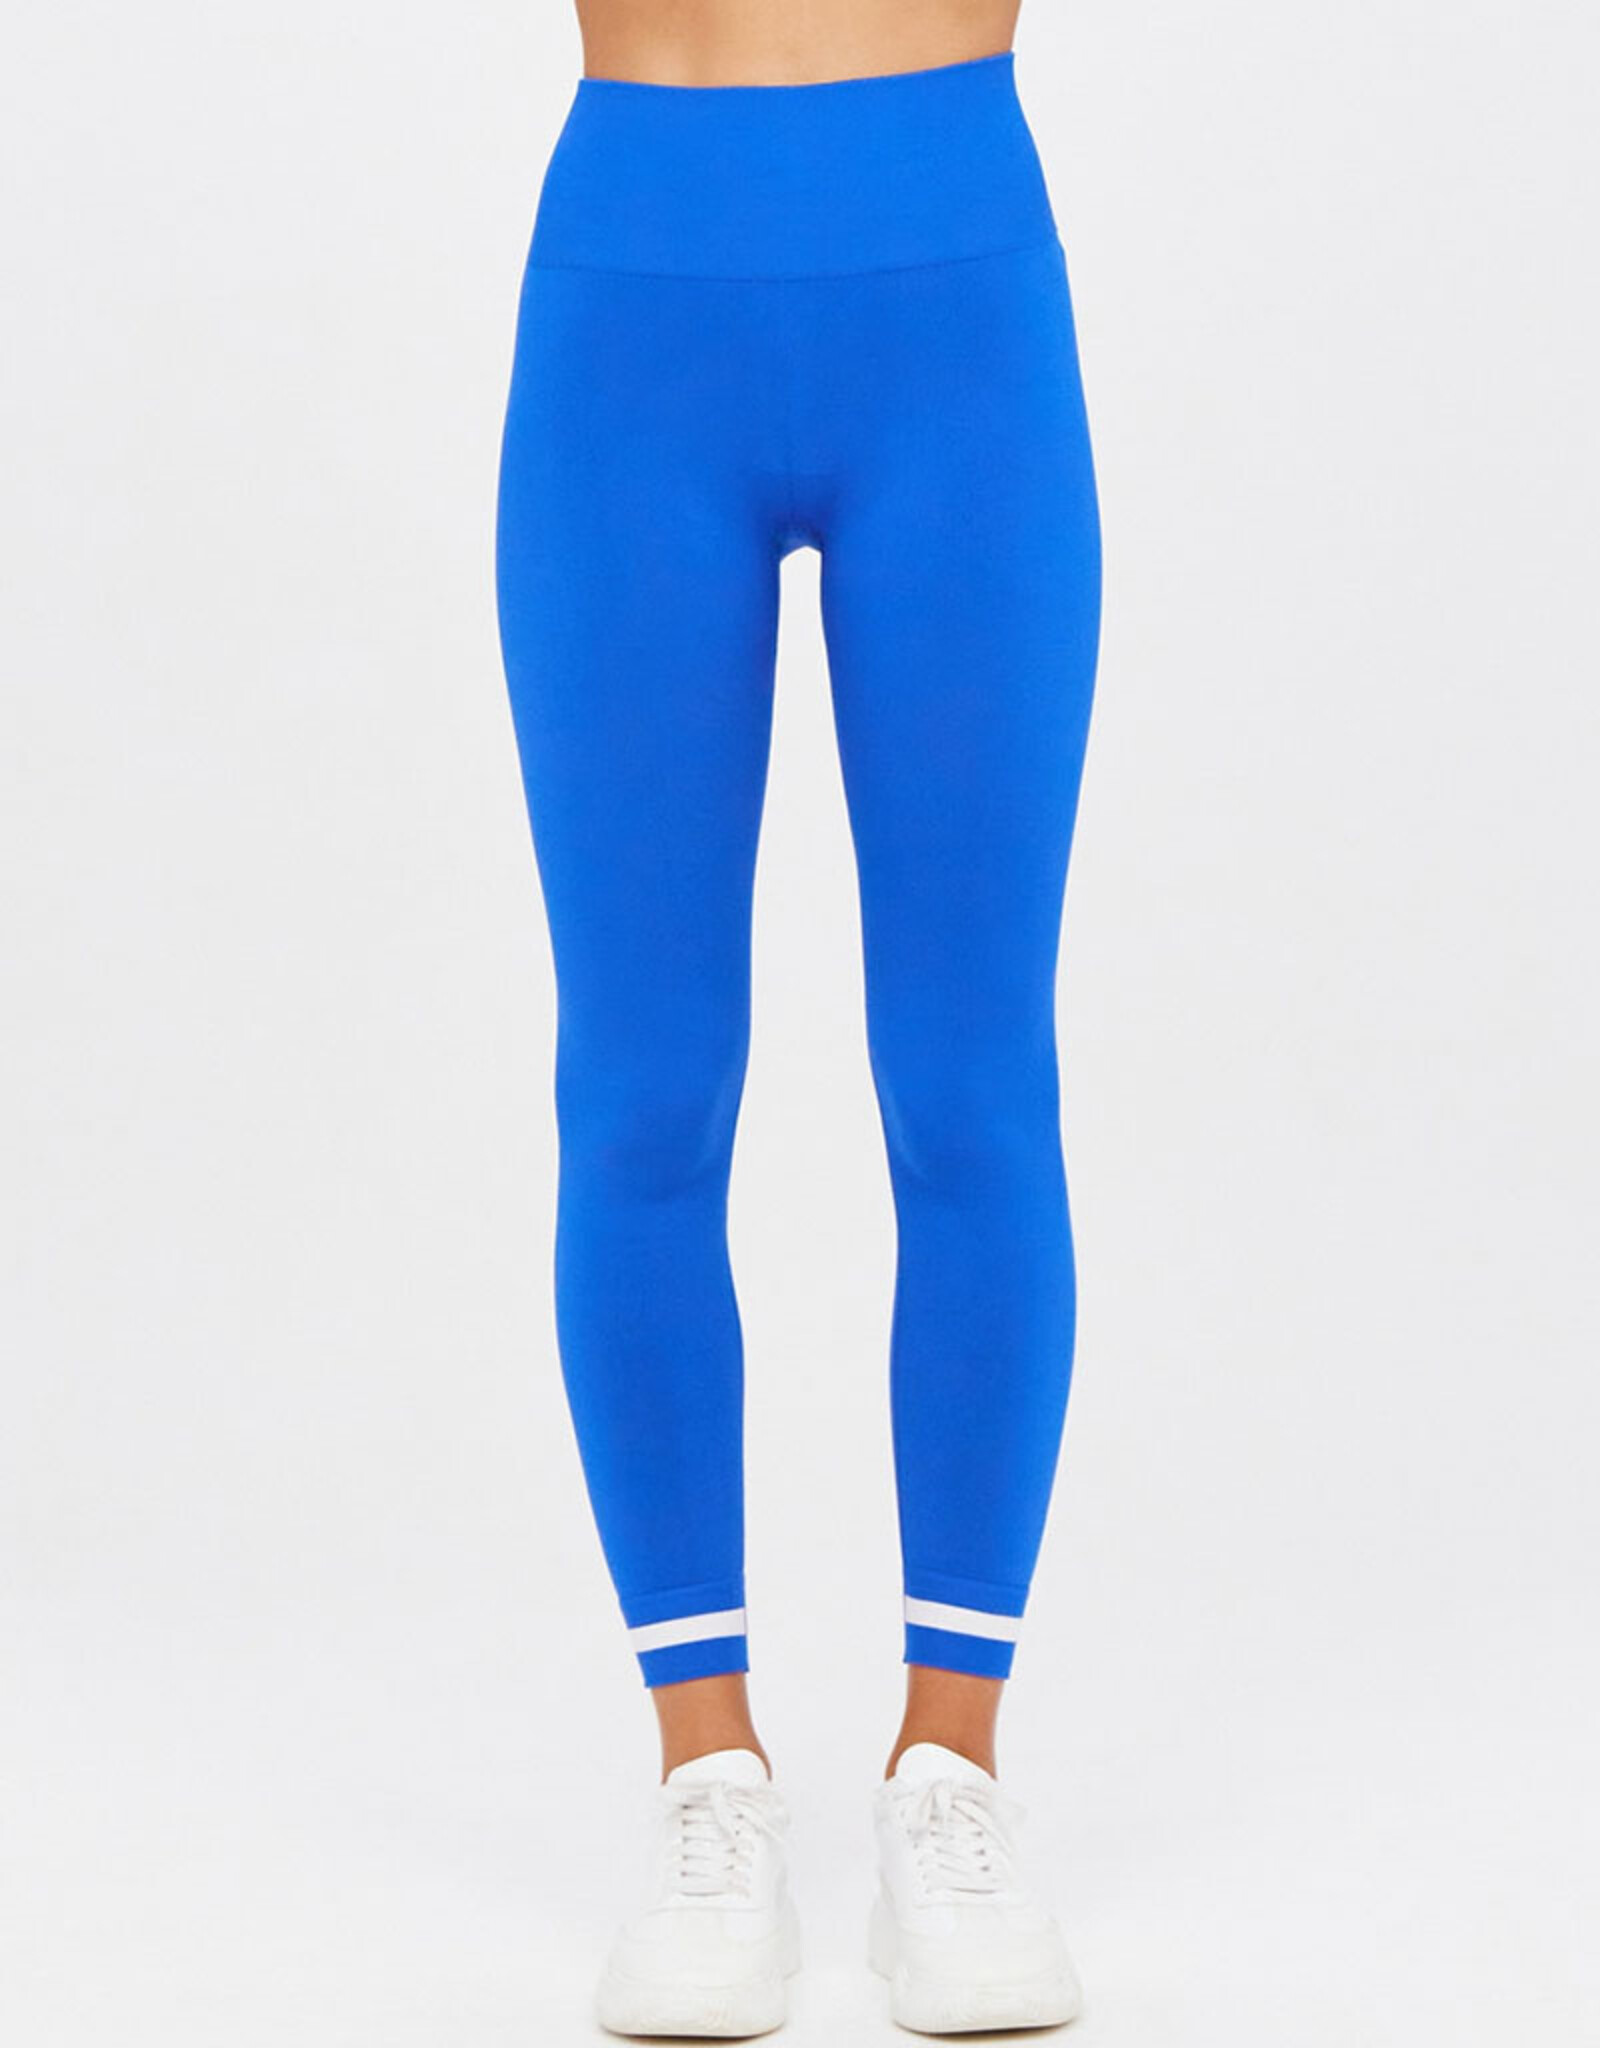 THE UPSIDE FORM SEAMLESS 25IN MIDI PANT